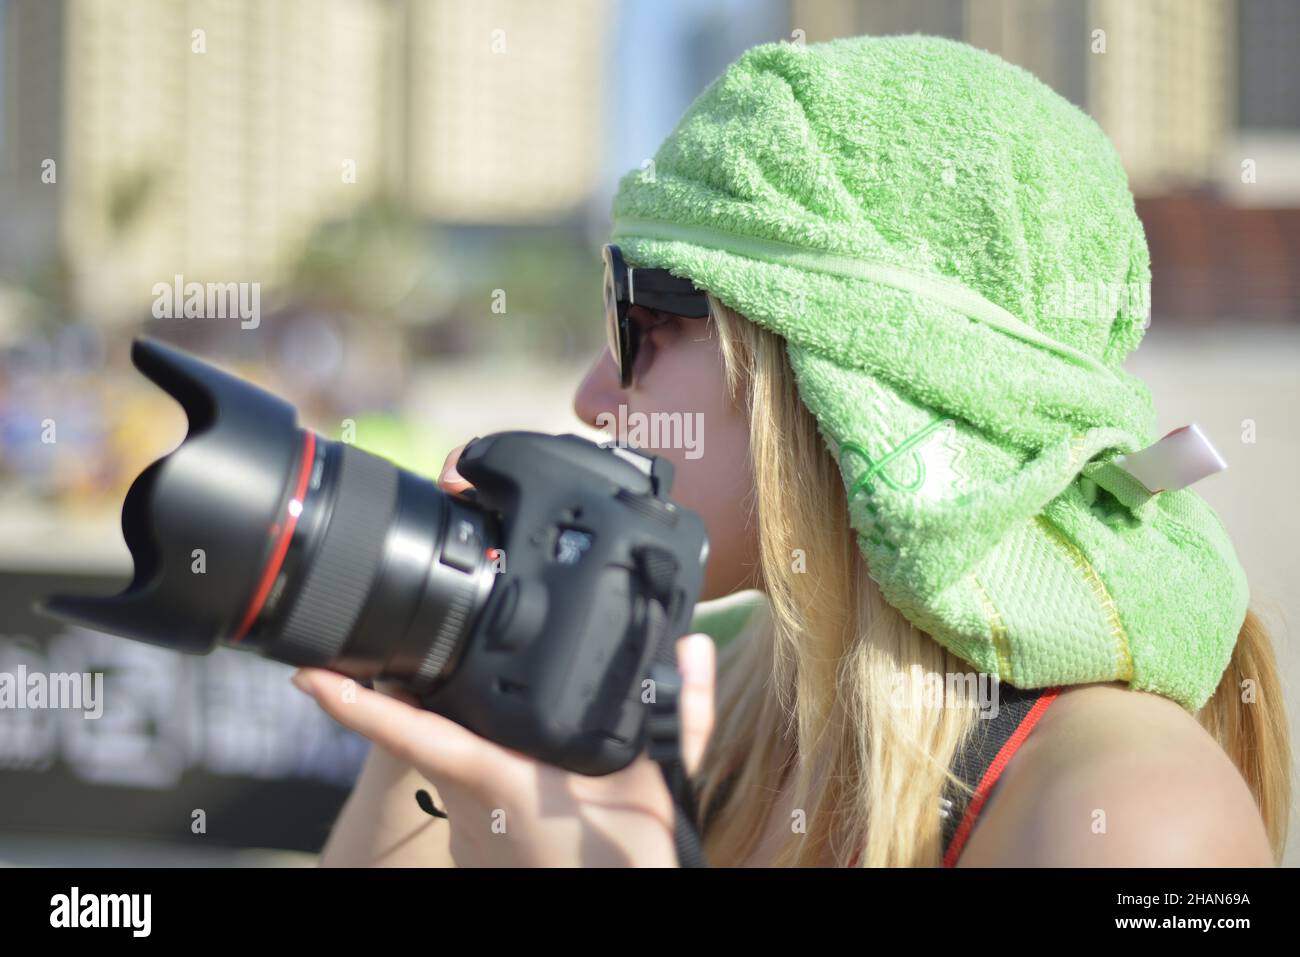 Young woman photographer taking photos outdoor on digital camera at a daytime Stock Photo